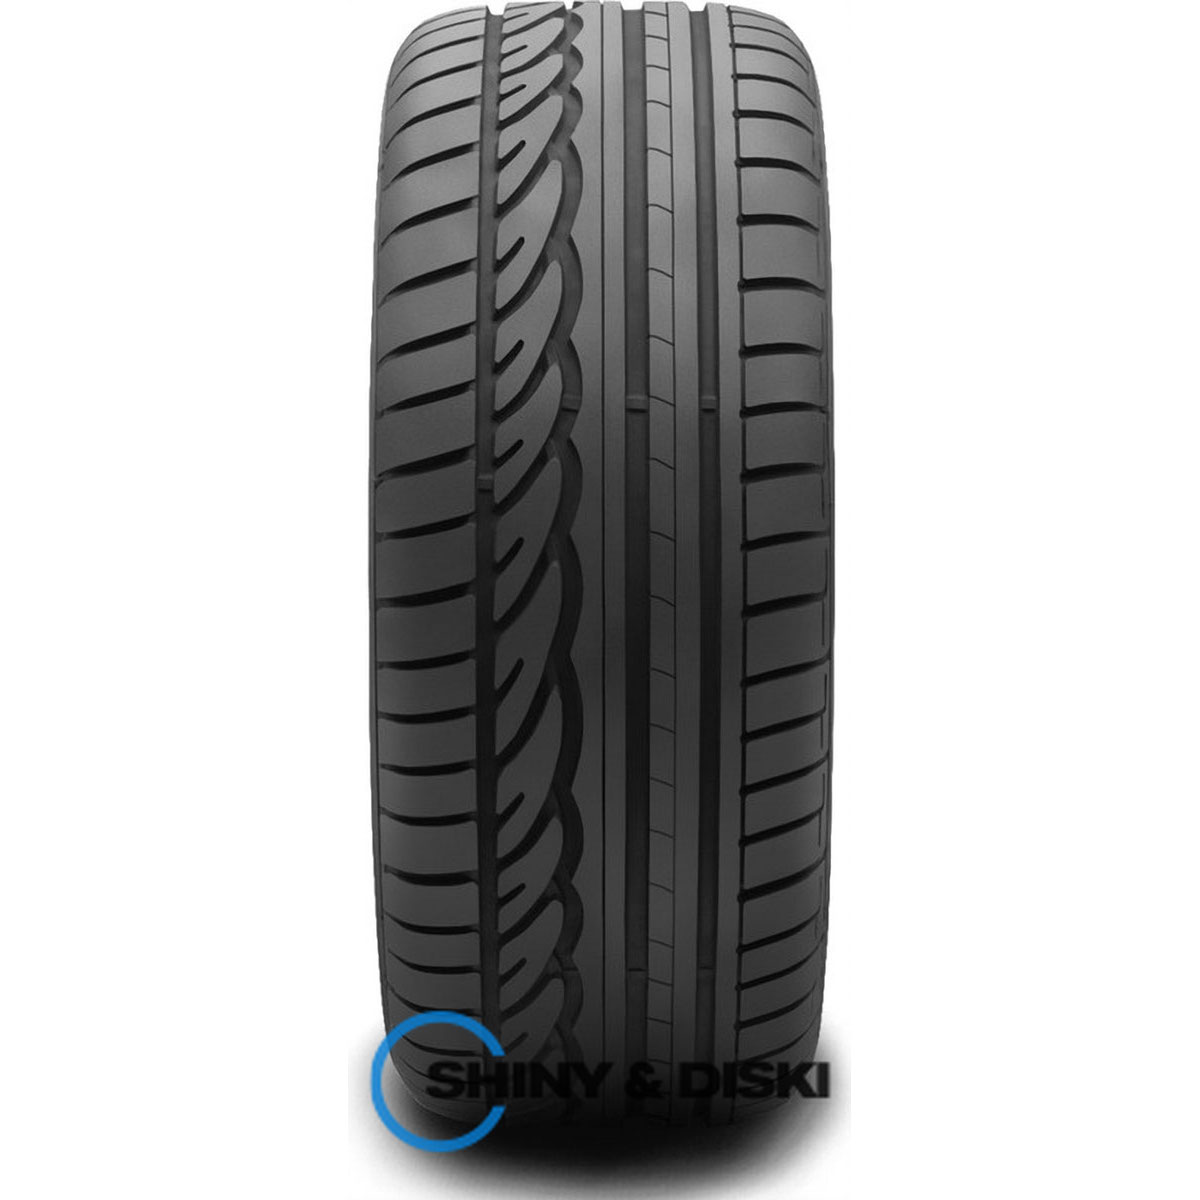 резина dunlop sp sport 01 a/s 225/40 r18 92h